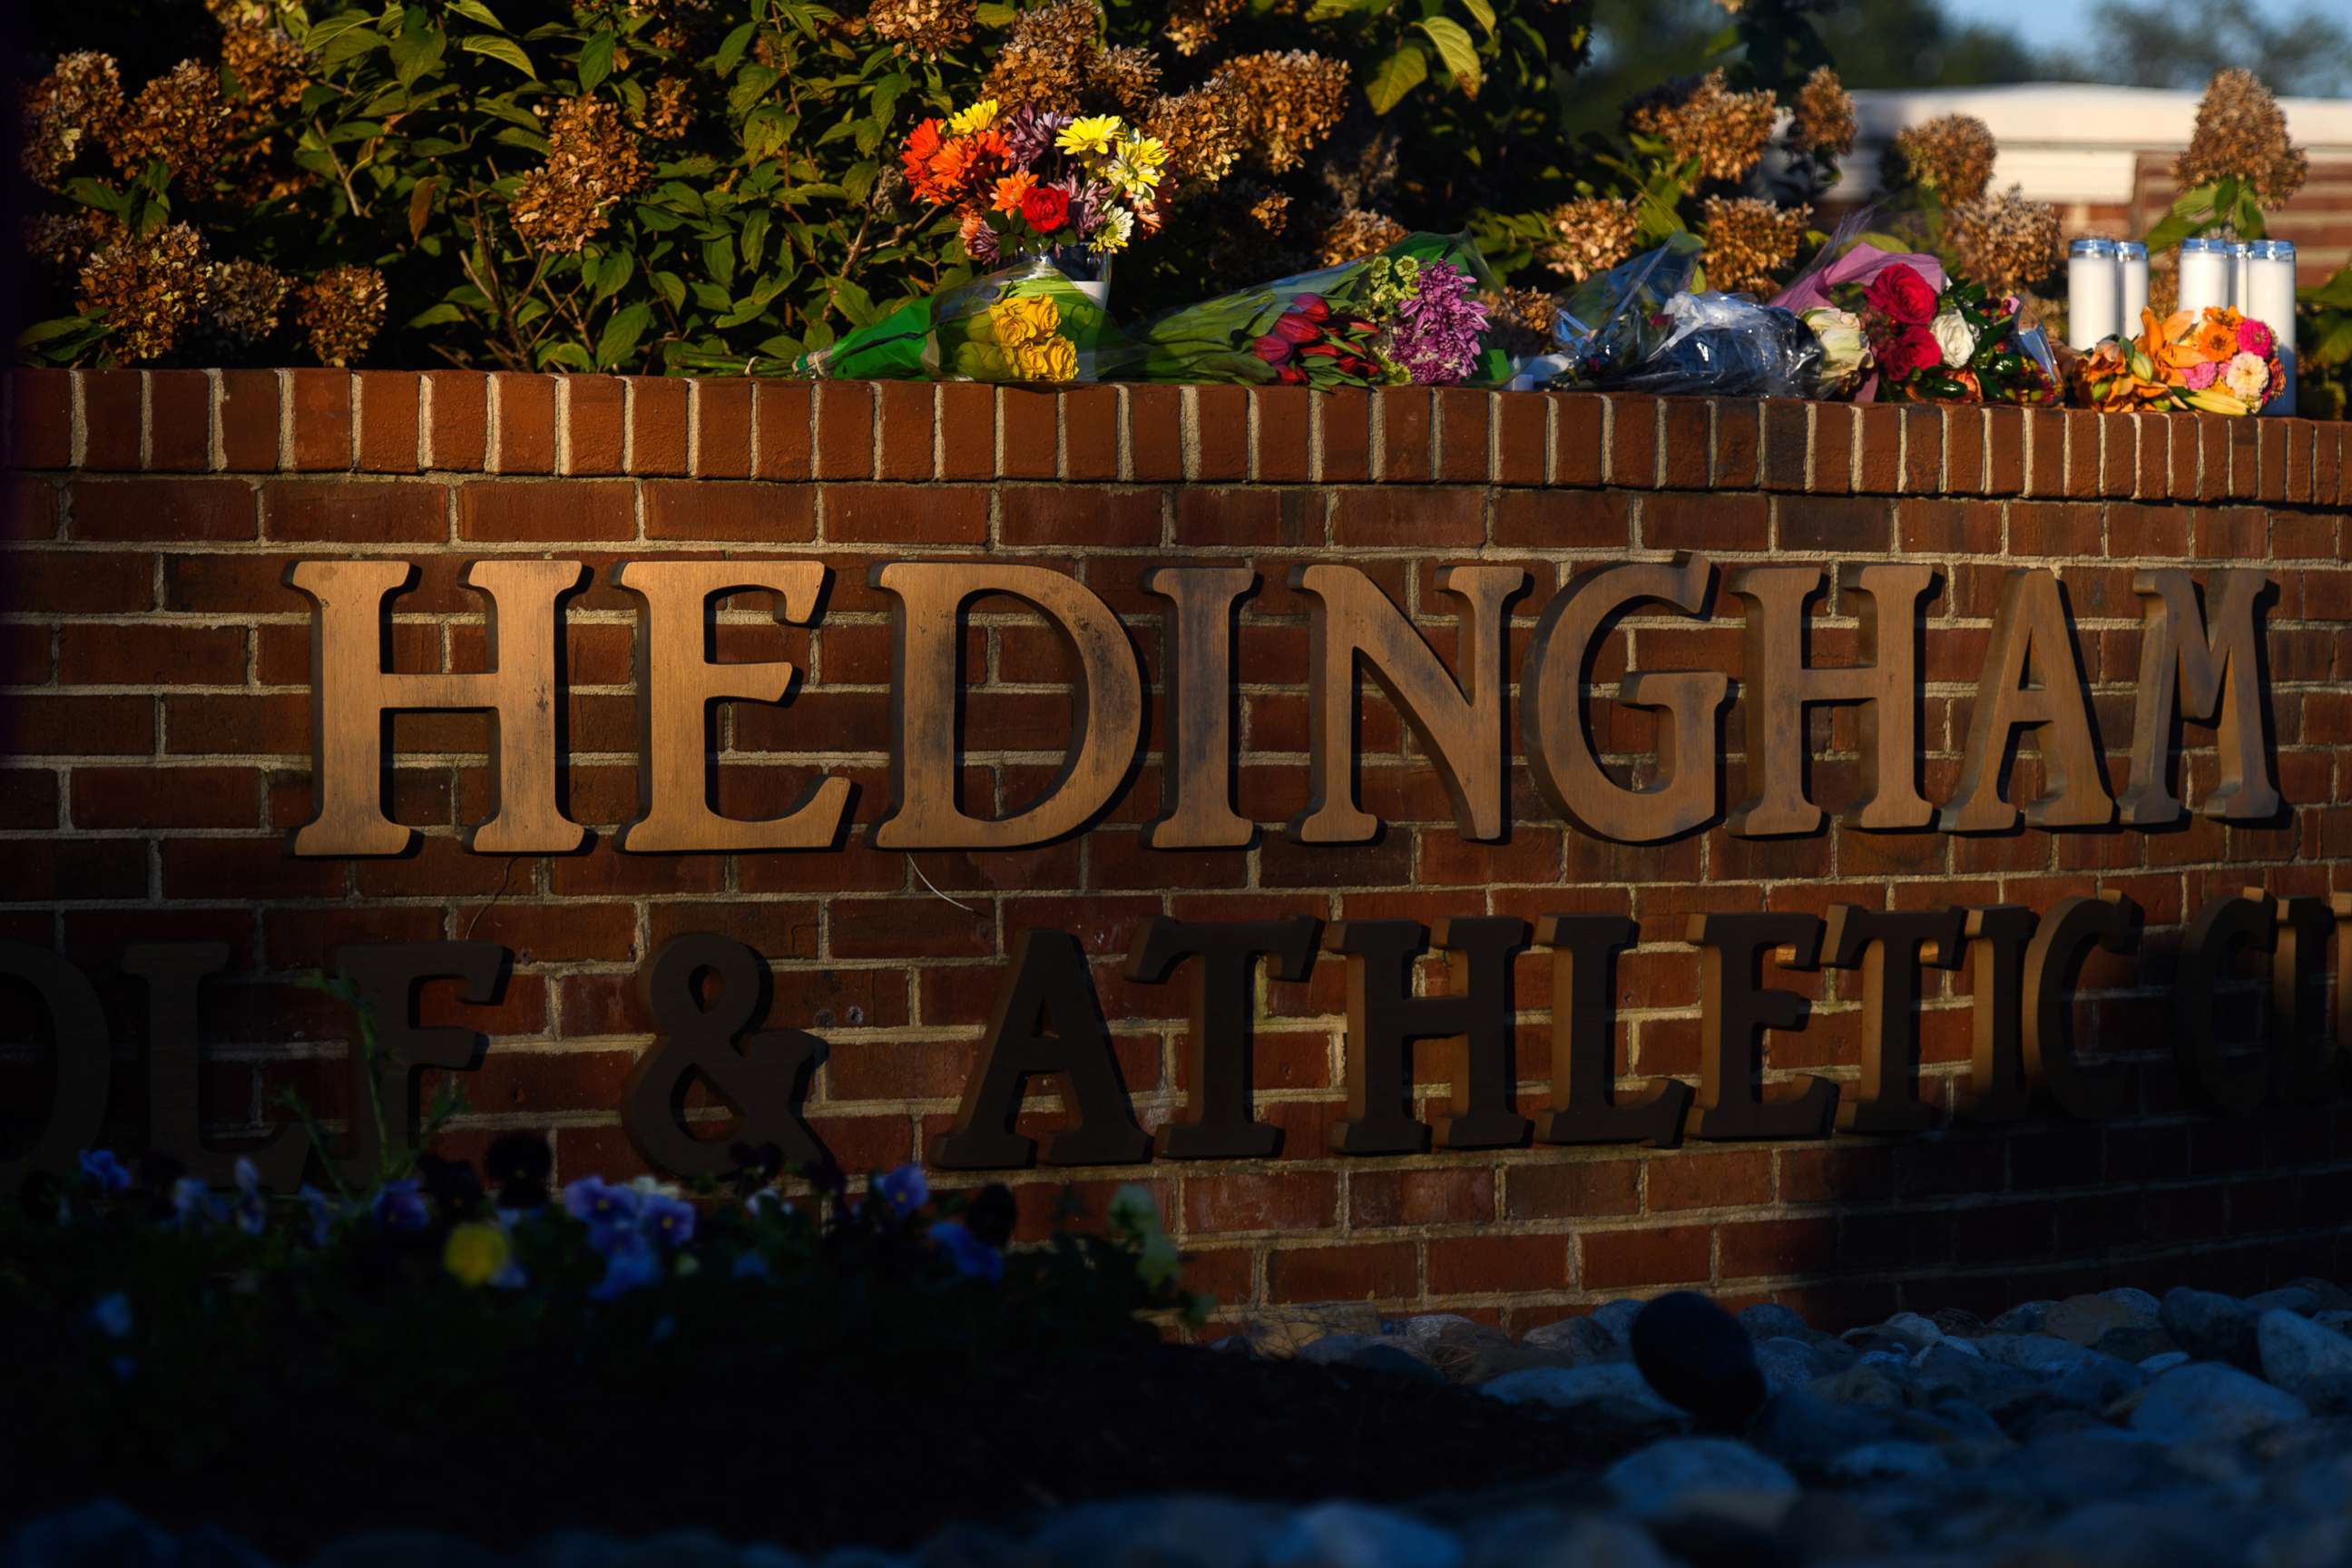 PHOTO: Flowers lay at the entrance of the Hedingham neighborhood, Oct. 14, 2022, in Raleigh, N.C., after a shooting left five dead.